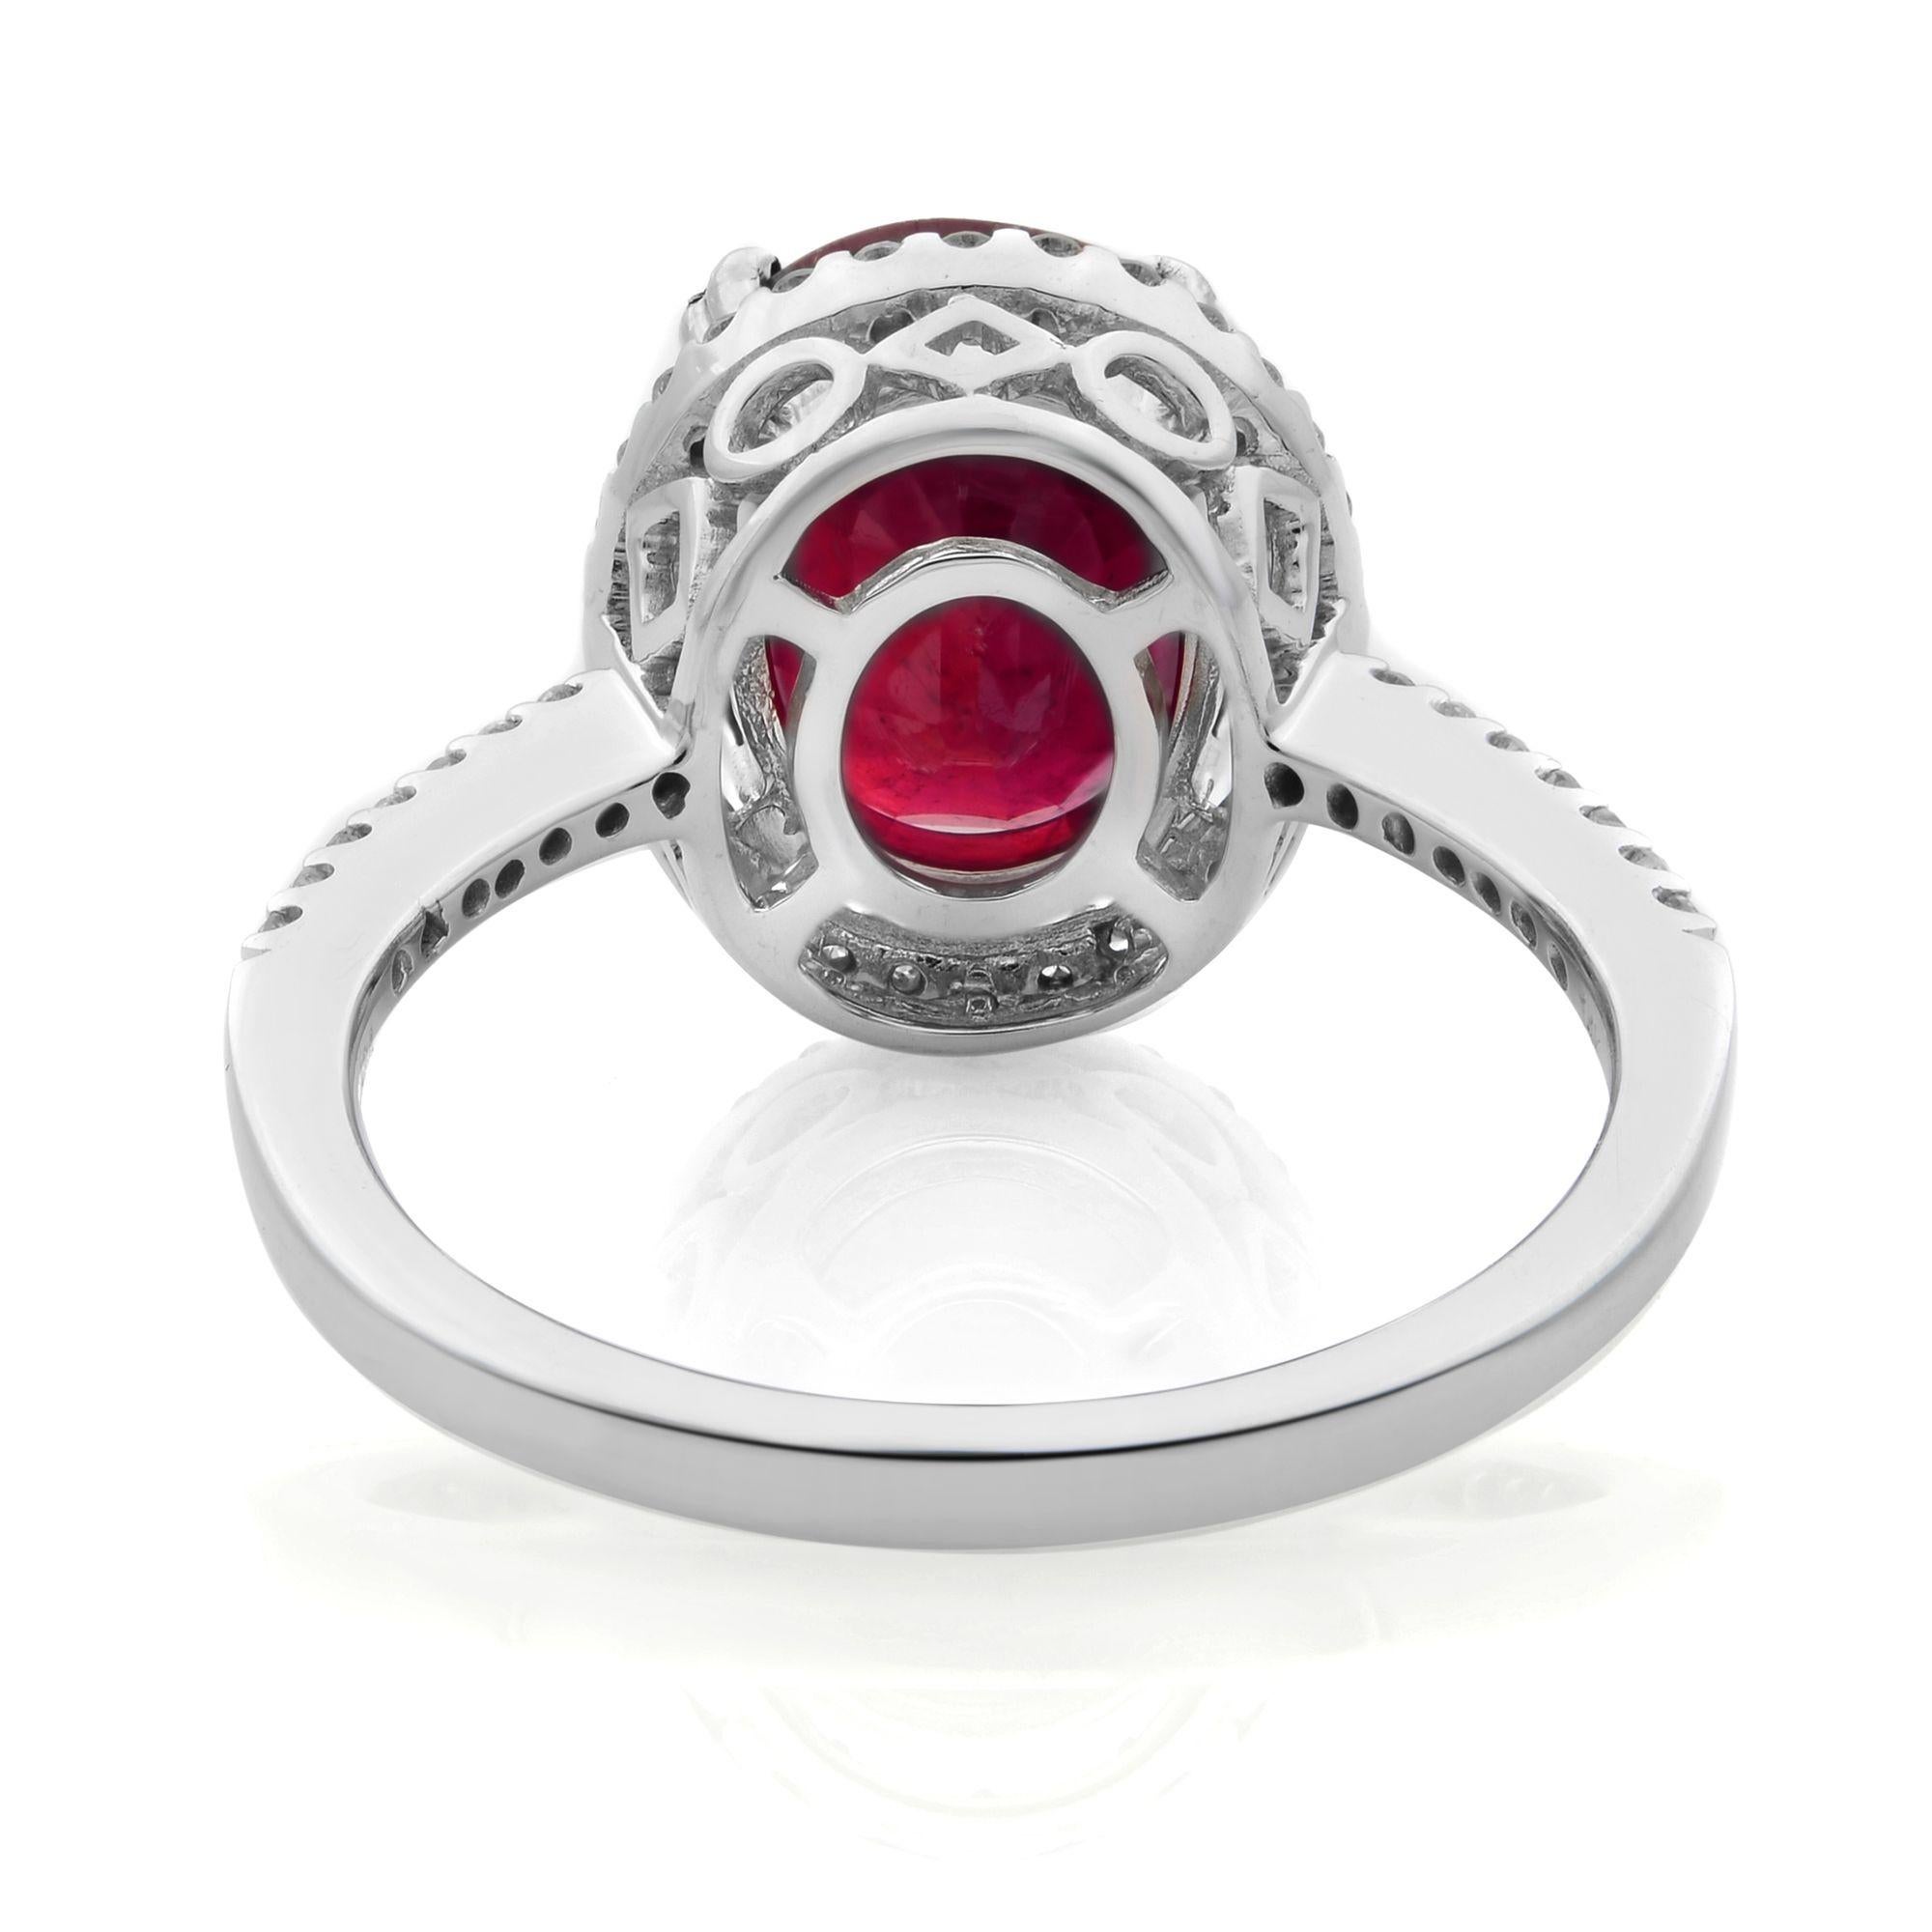 Rachel Koen 3.60cttw Ruby 0.22cttw Diamond Halo Engagement Ring 14K White Gold In Excellent Condition For Sale In New York, NY